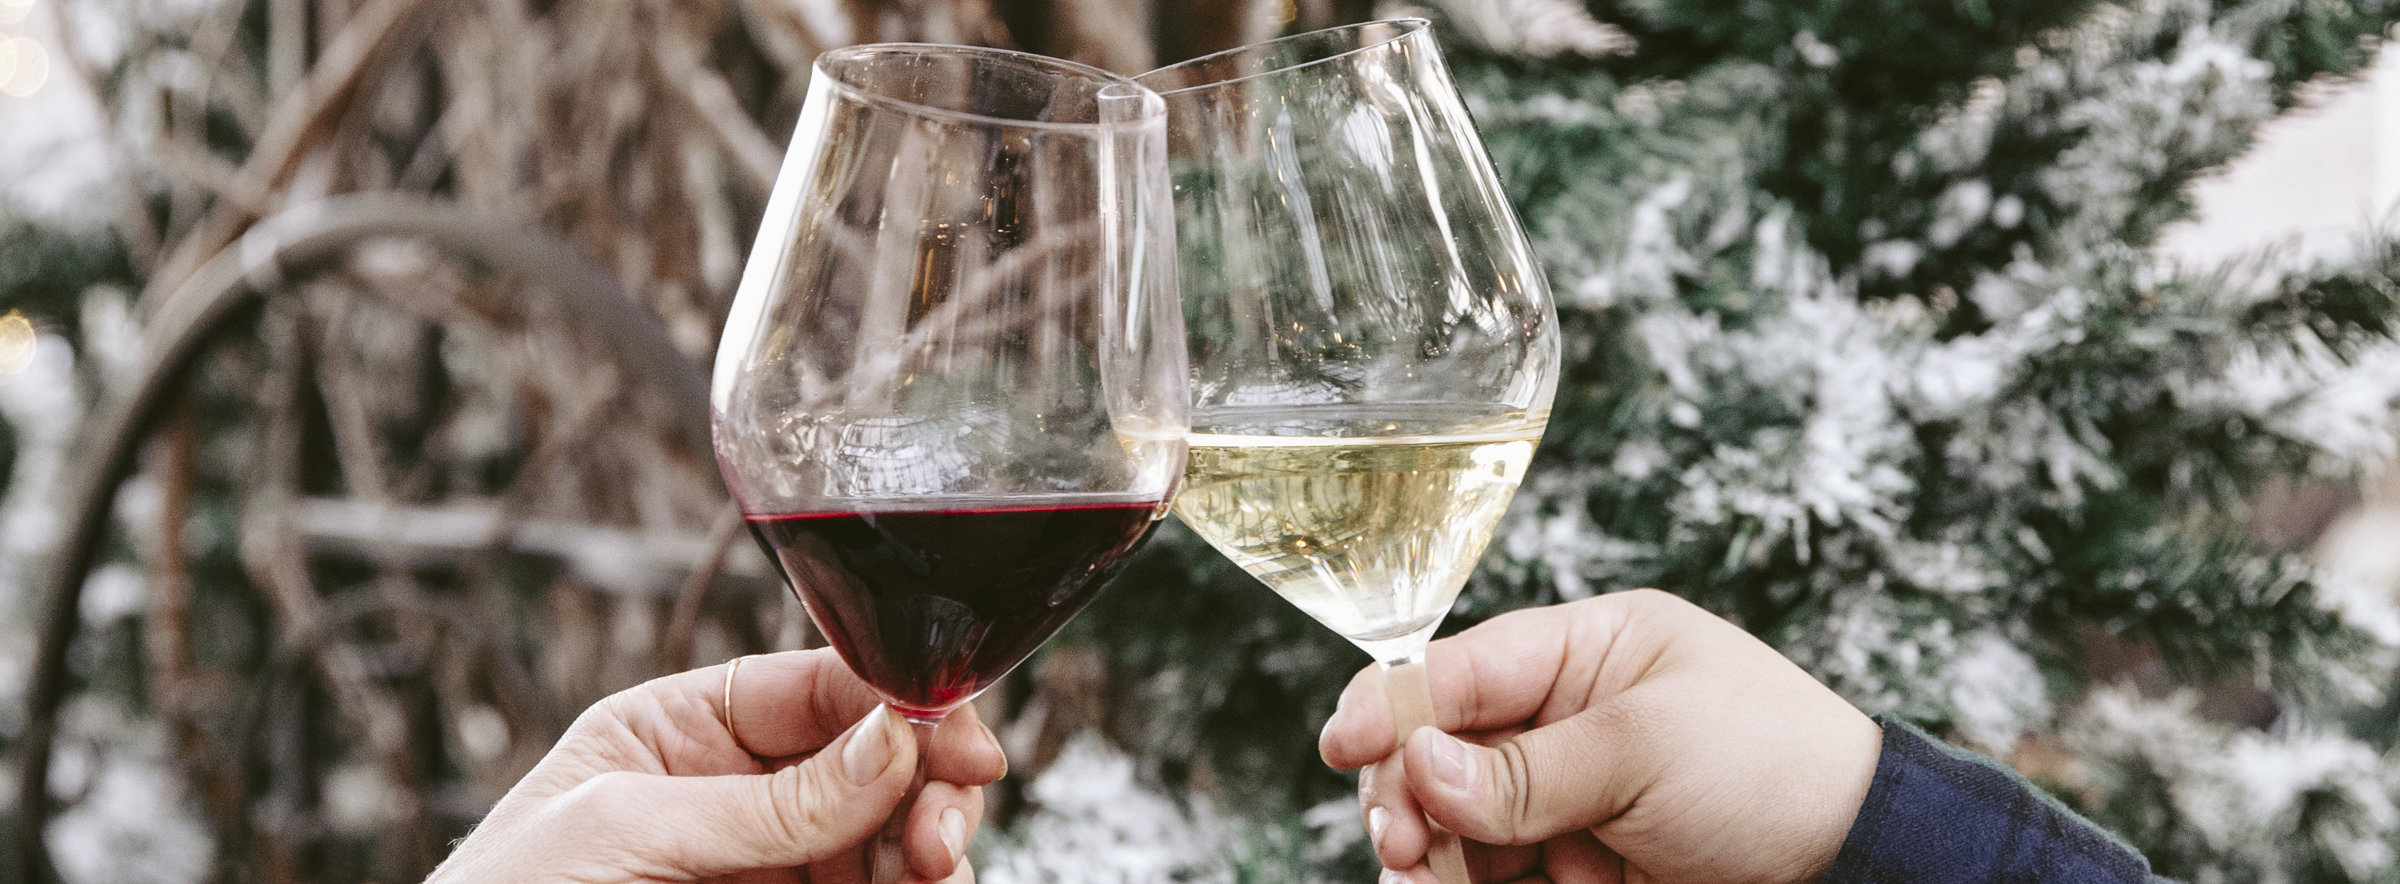 10 Bordeaux wines under £15 for your festive table